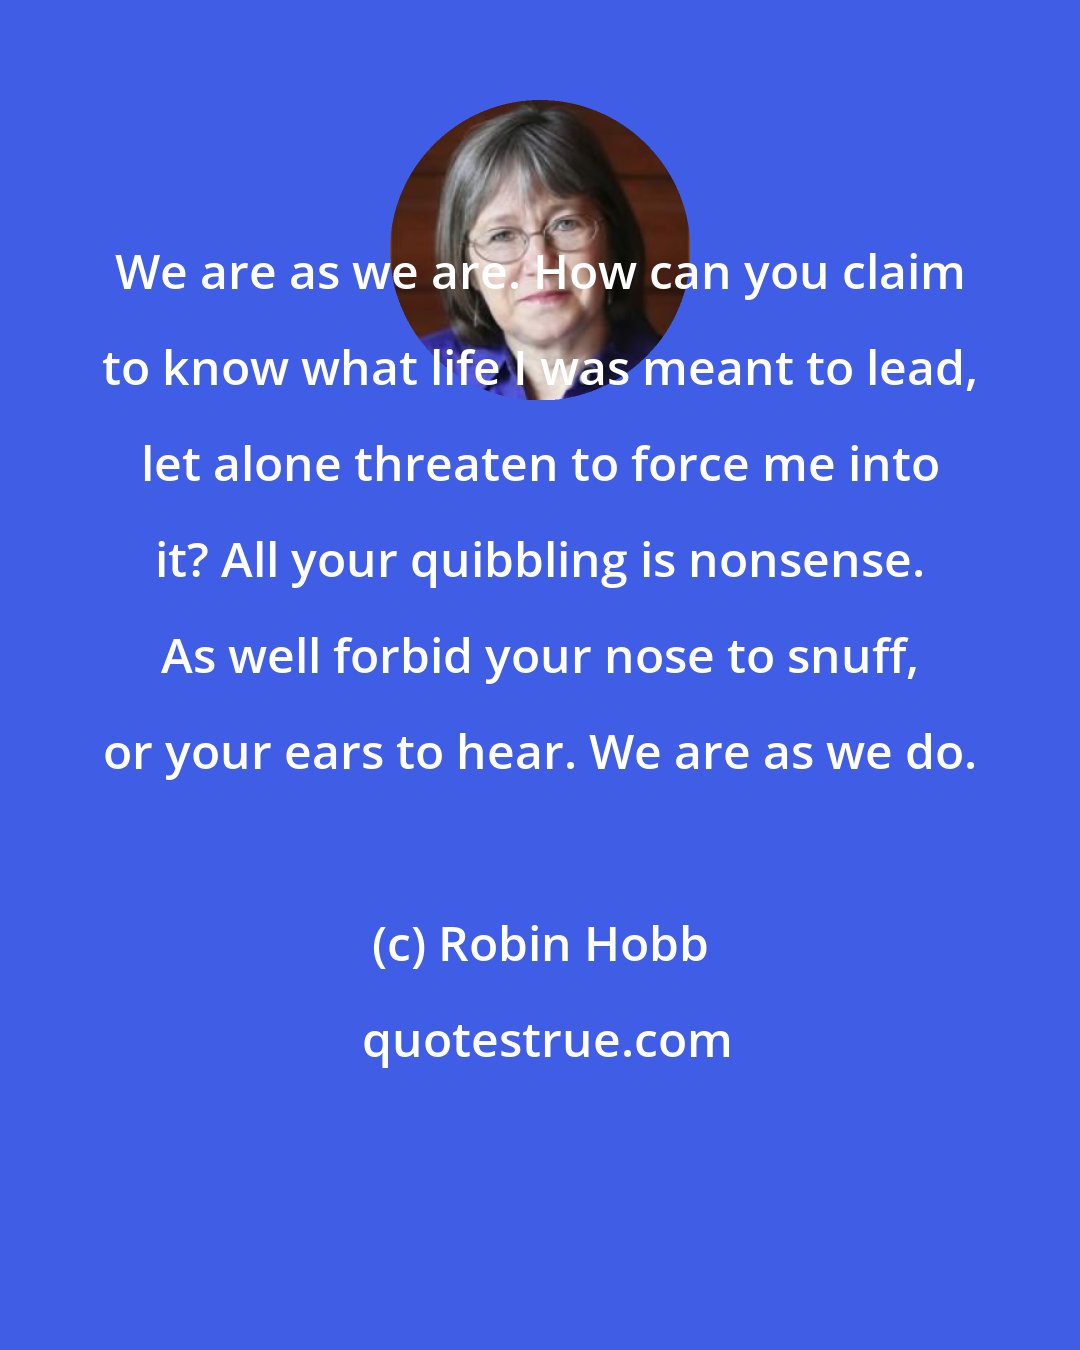 Robin Hobb: We are as we are. How can you claim to know what life I was meant to lead, let alone threaten to force me into it? All your quibbling is nonsense. As well forbid your nose to snuff, or your ears to hear. We are as we do.